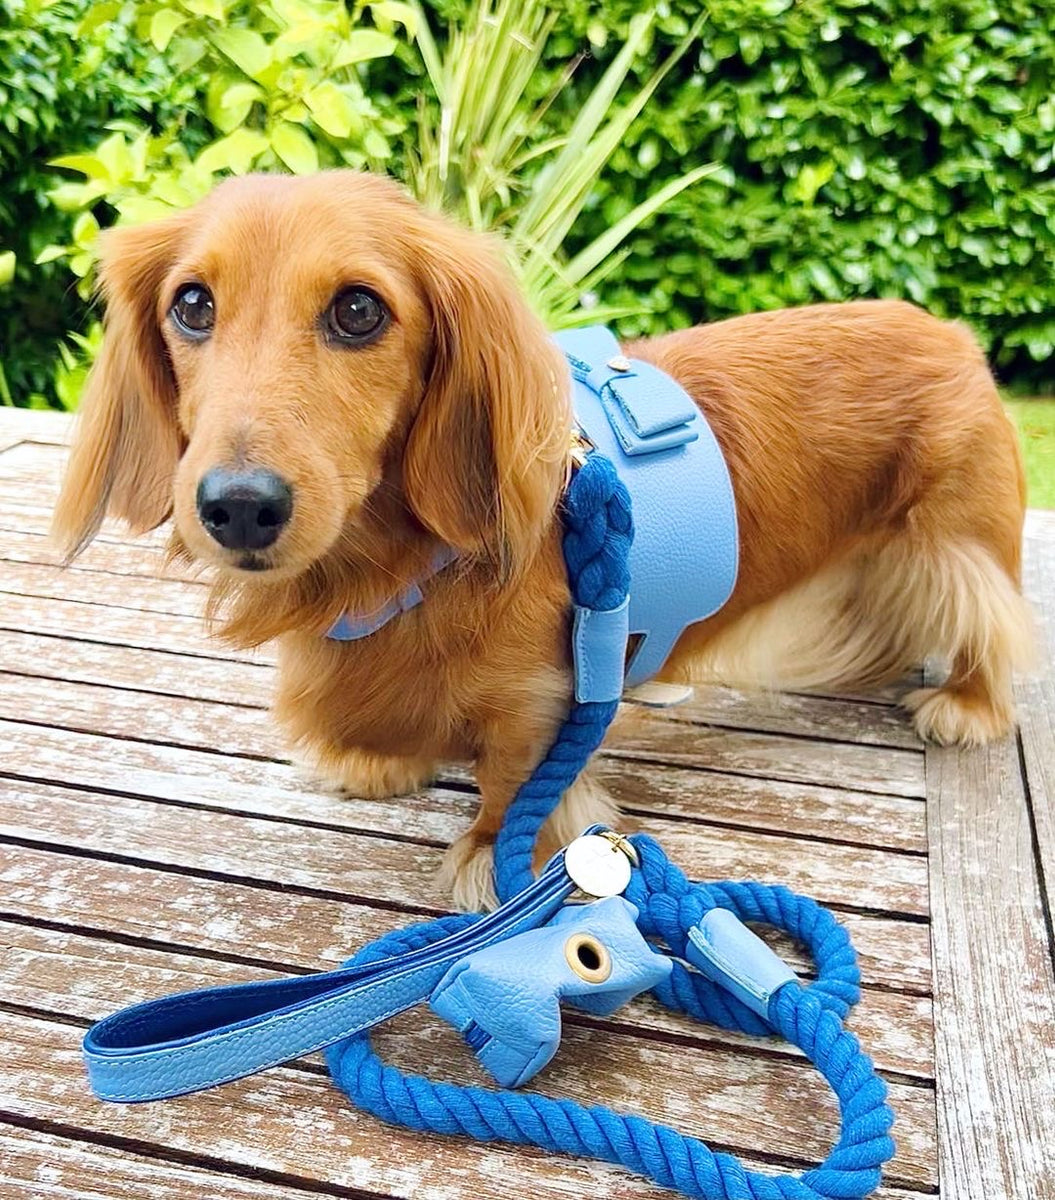 PoisePup Harness Wildest One - Xsmall